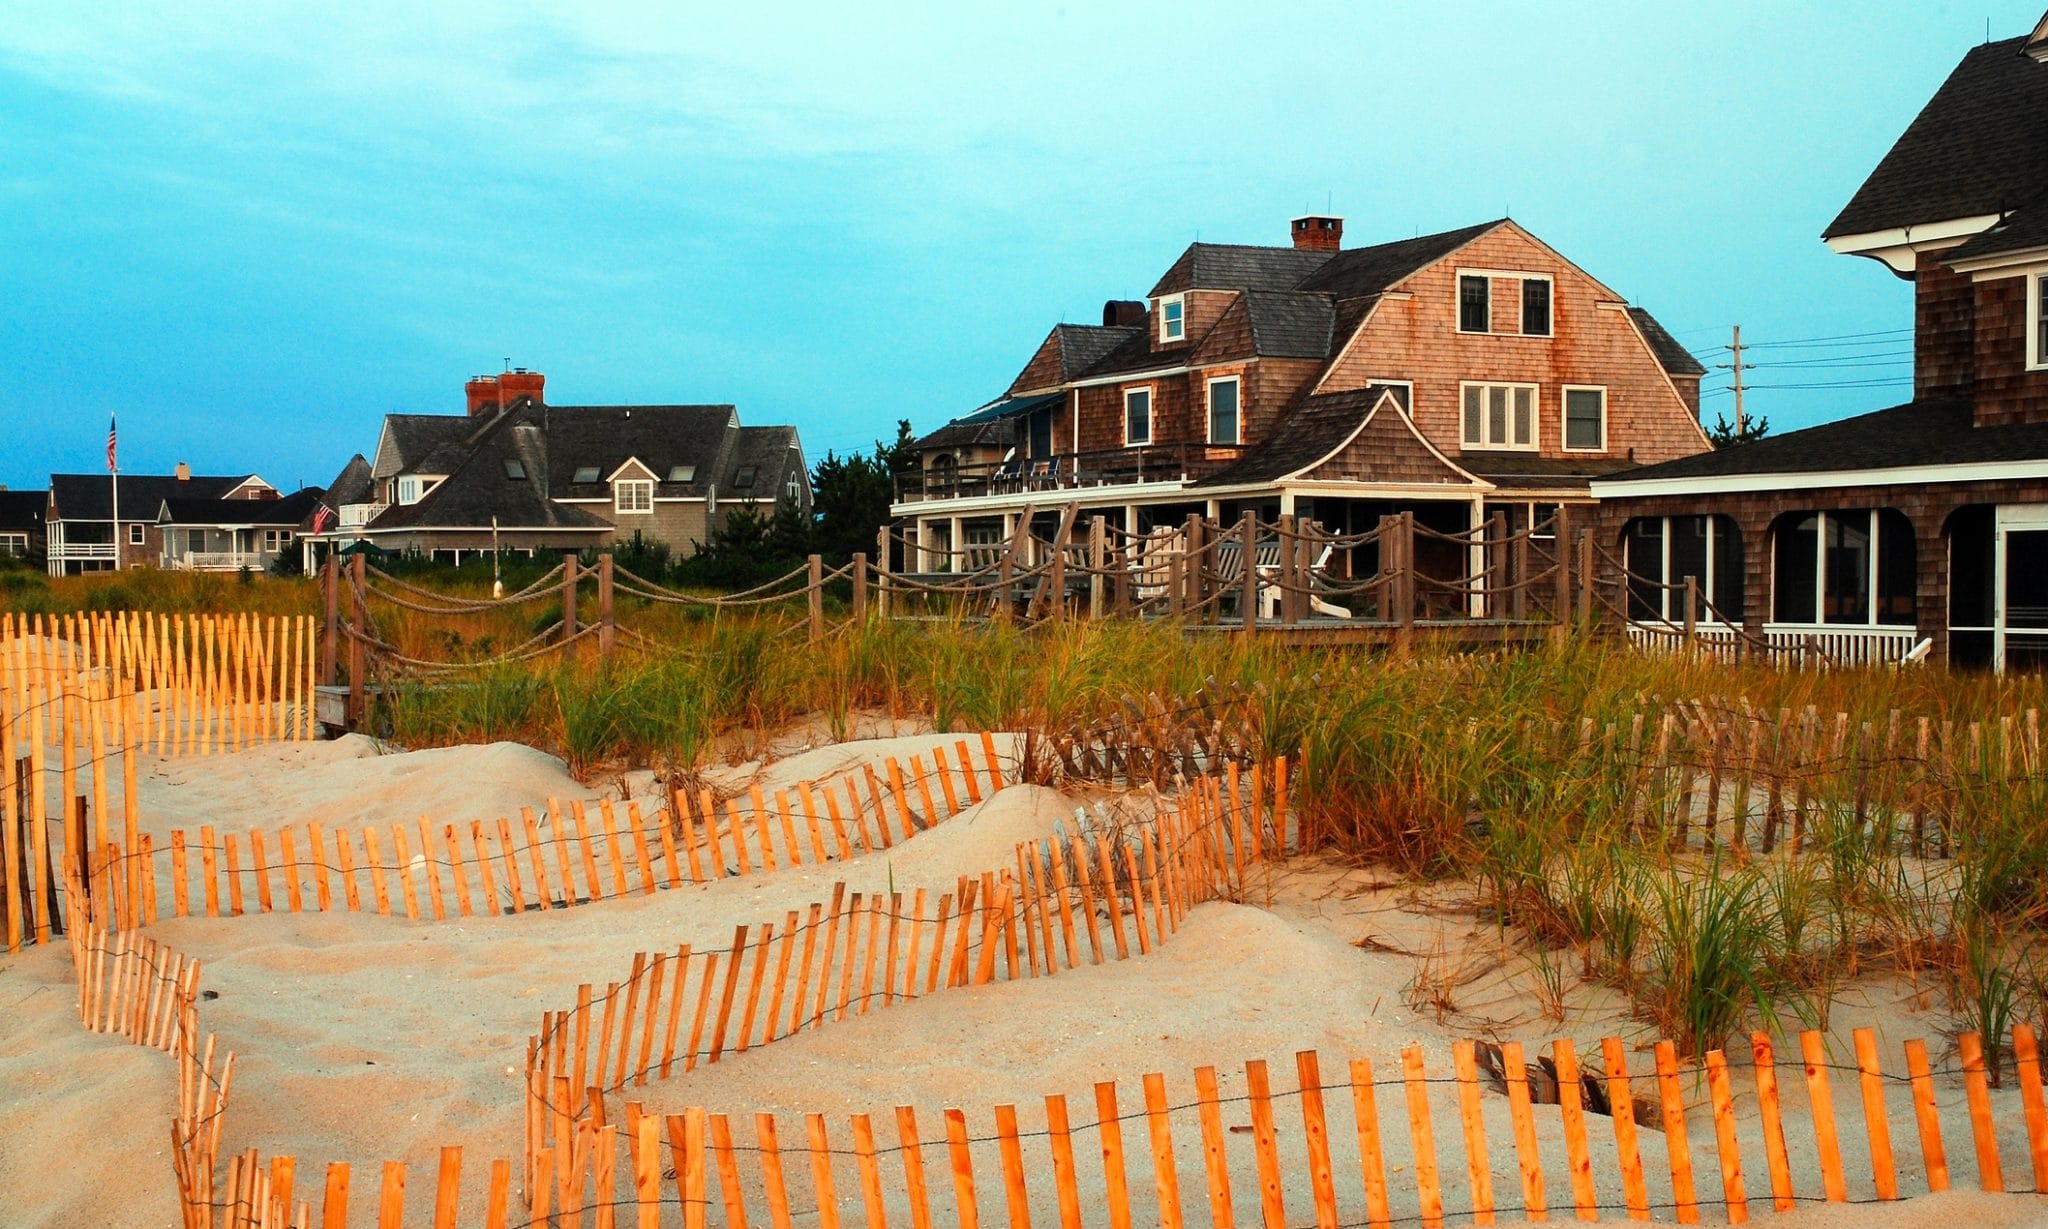 Reasons why a Rental House is Cape may, NJ, is ideal for your Family Holiday